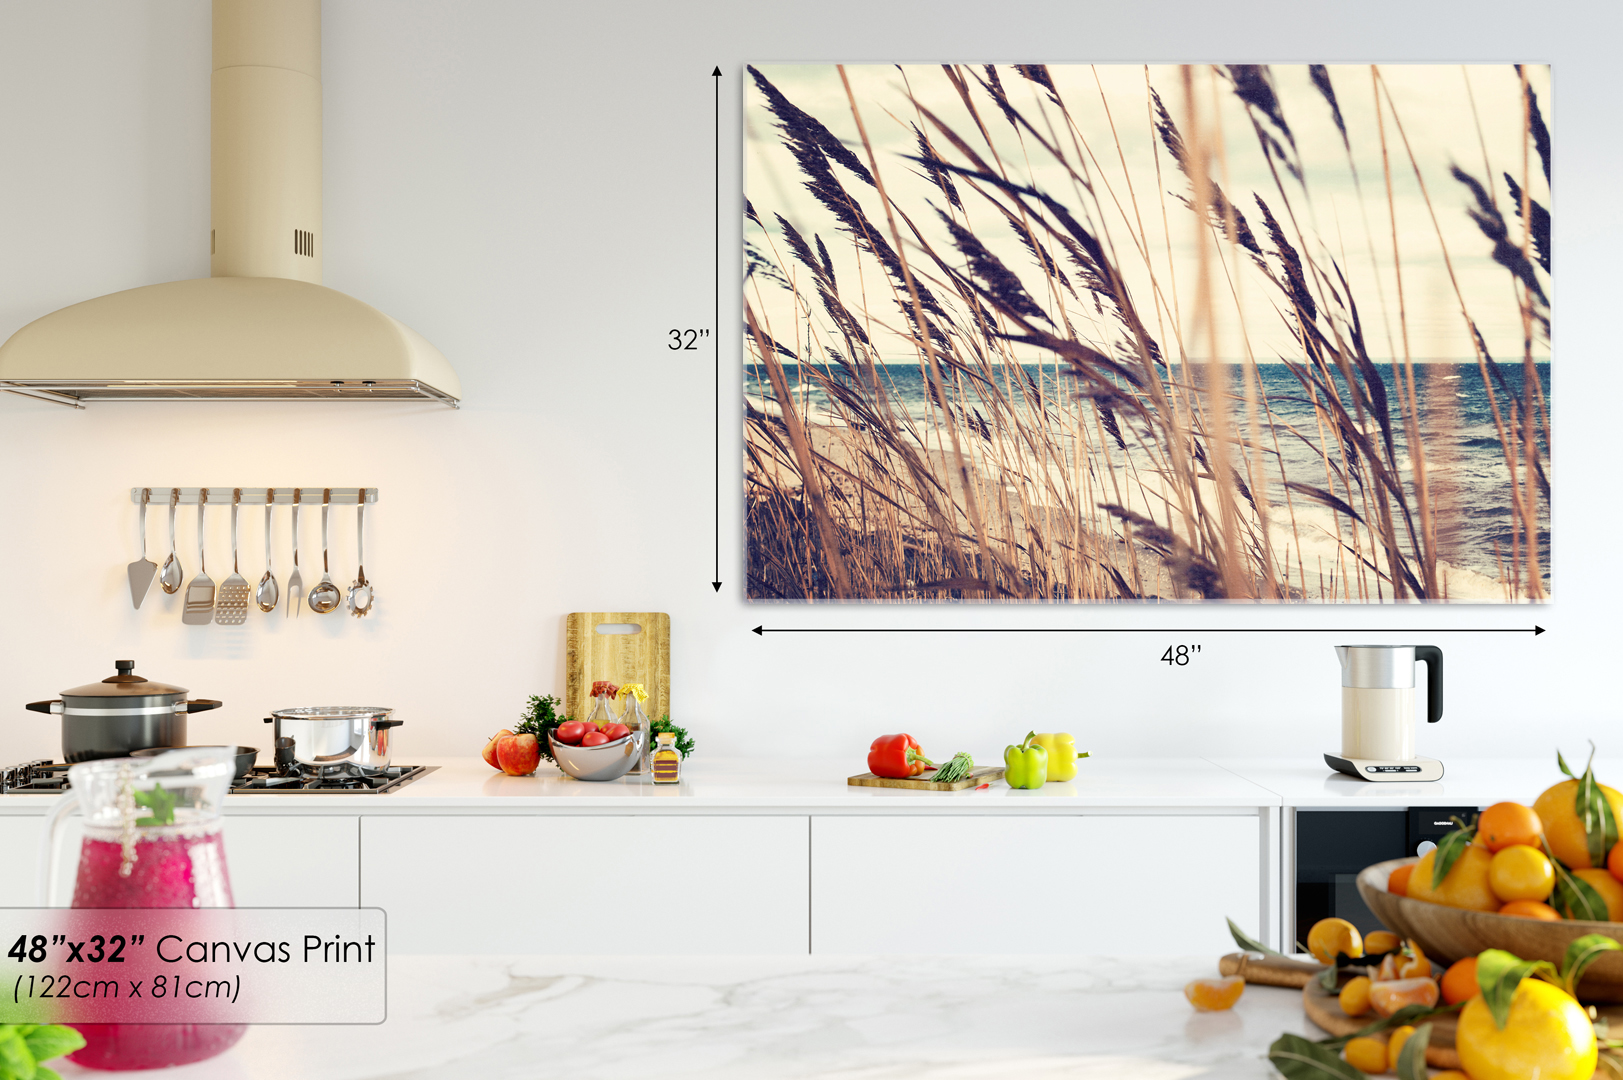 SC447 Ocean Beach Shrubbery Scenic Wall Art Picture Large Canvas Print 